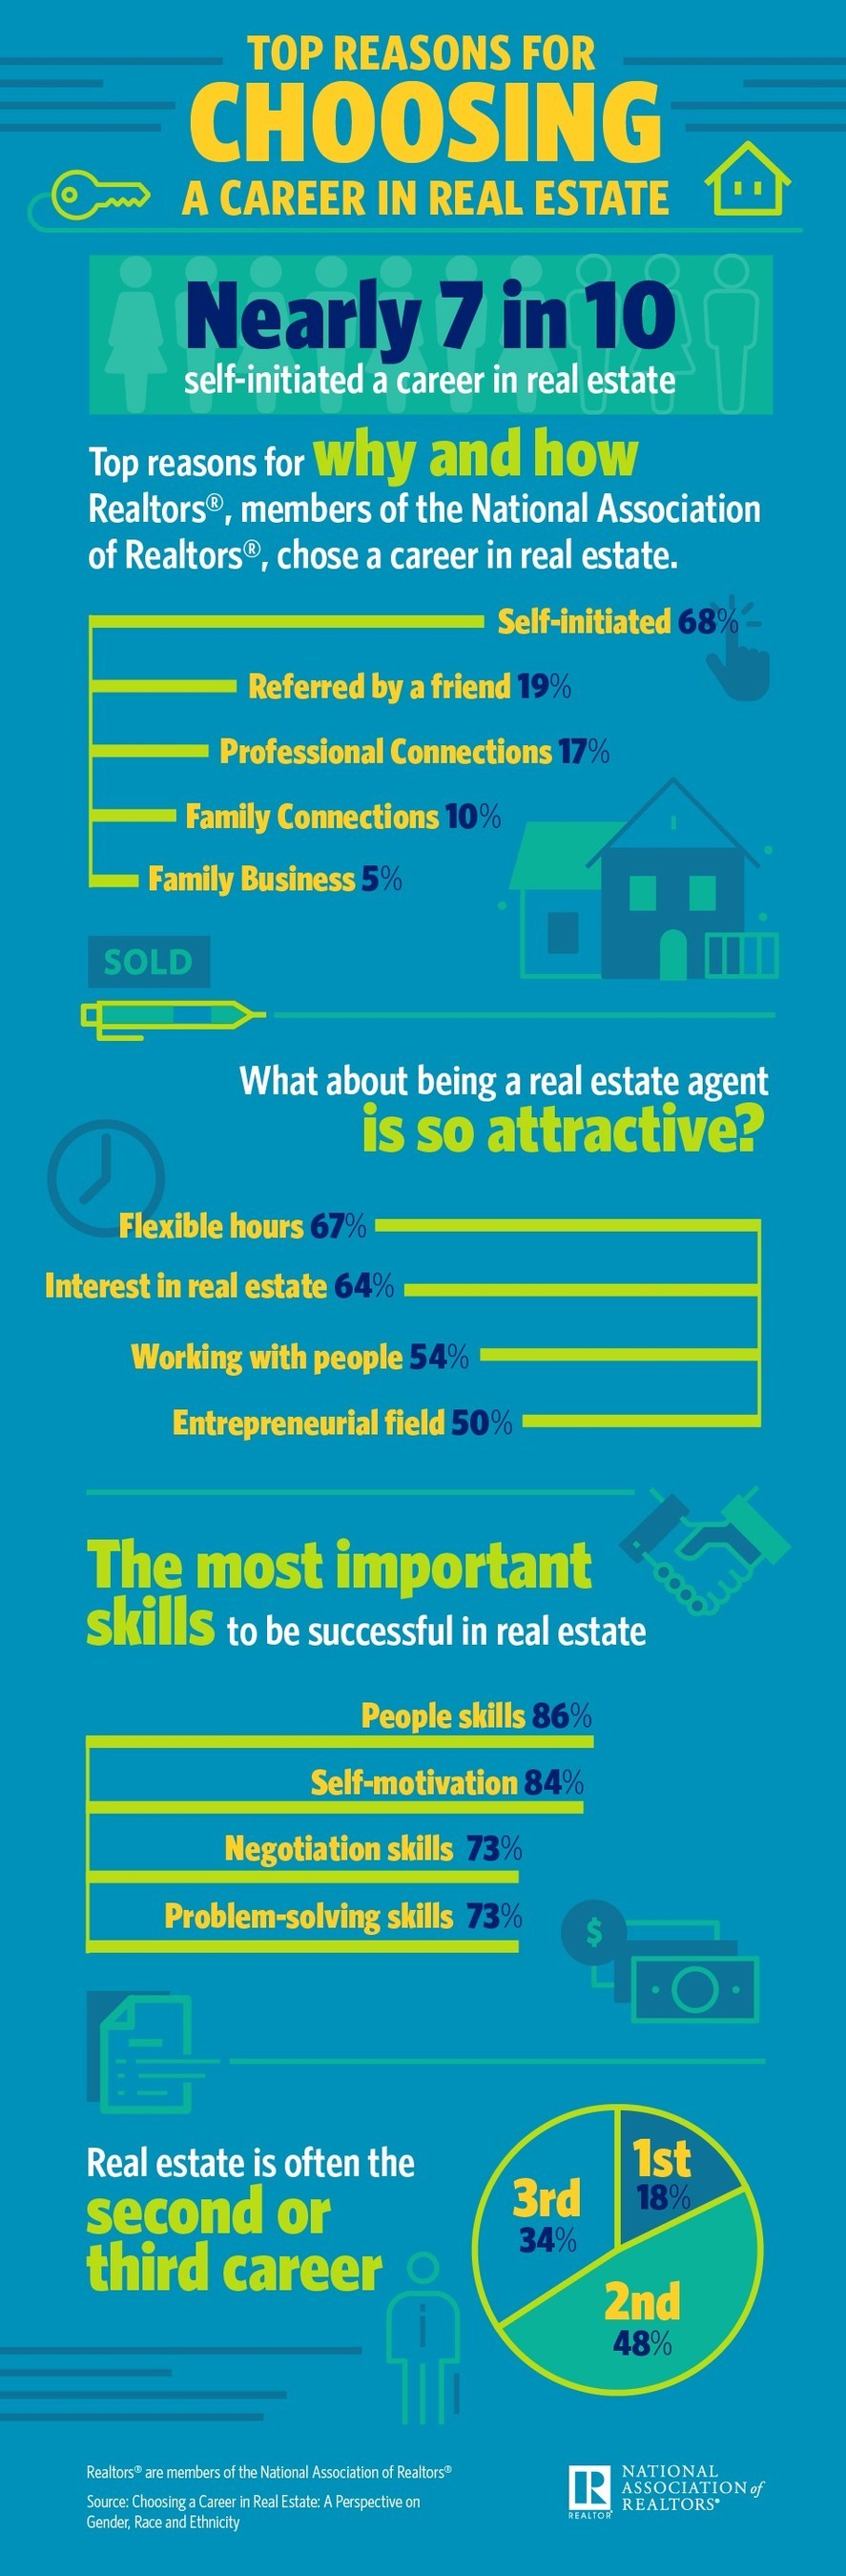 NAR careers final Infographic